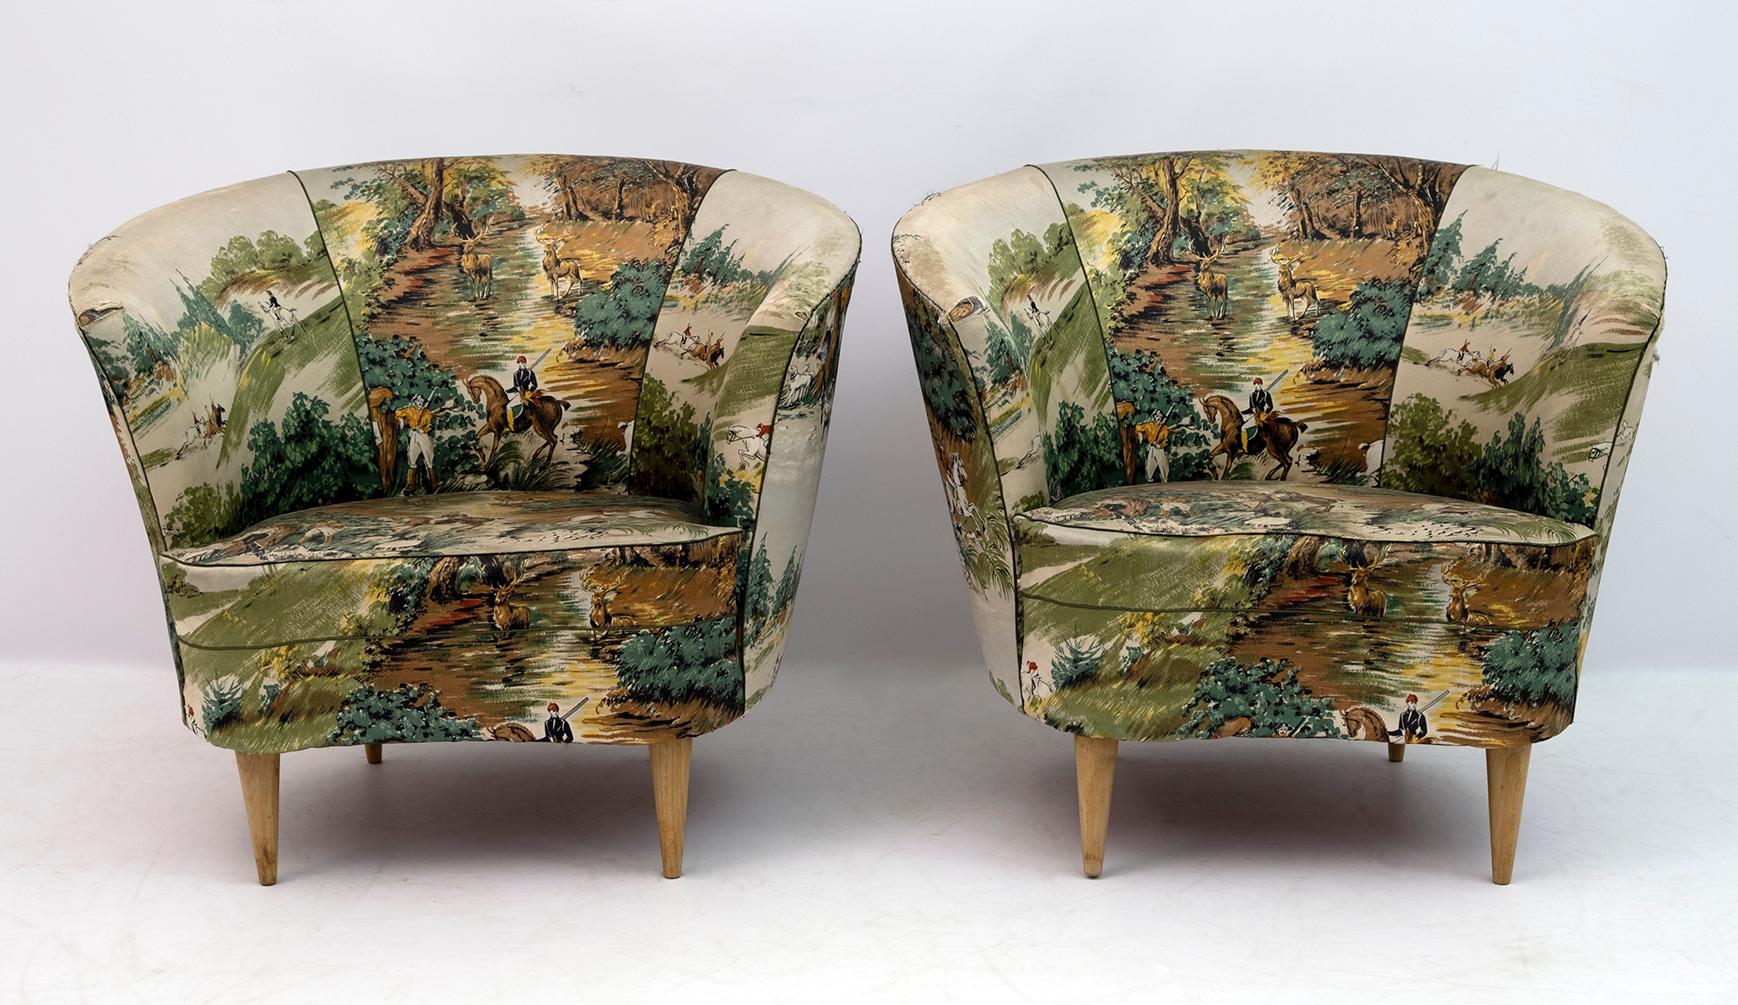 Pair of armchairs produced by Casa e Giardino in the style of Gio Ponti, the upholstery needs to be redone, while the structure is sturdy and solid.

